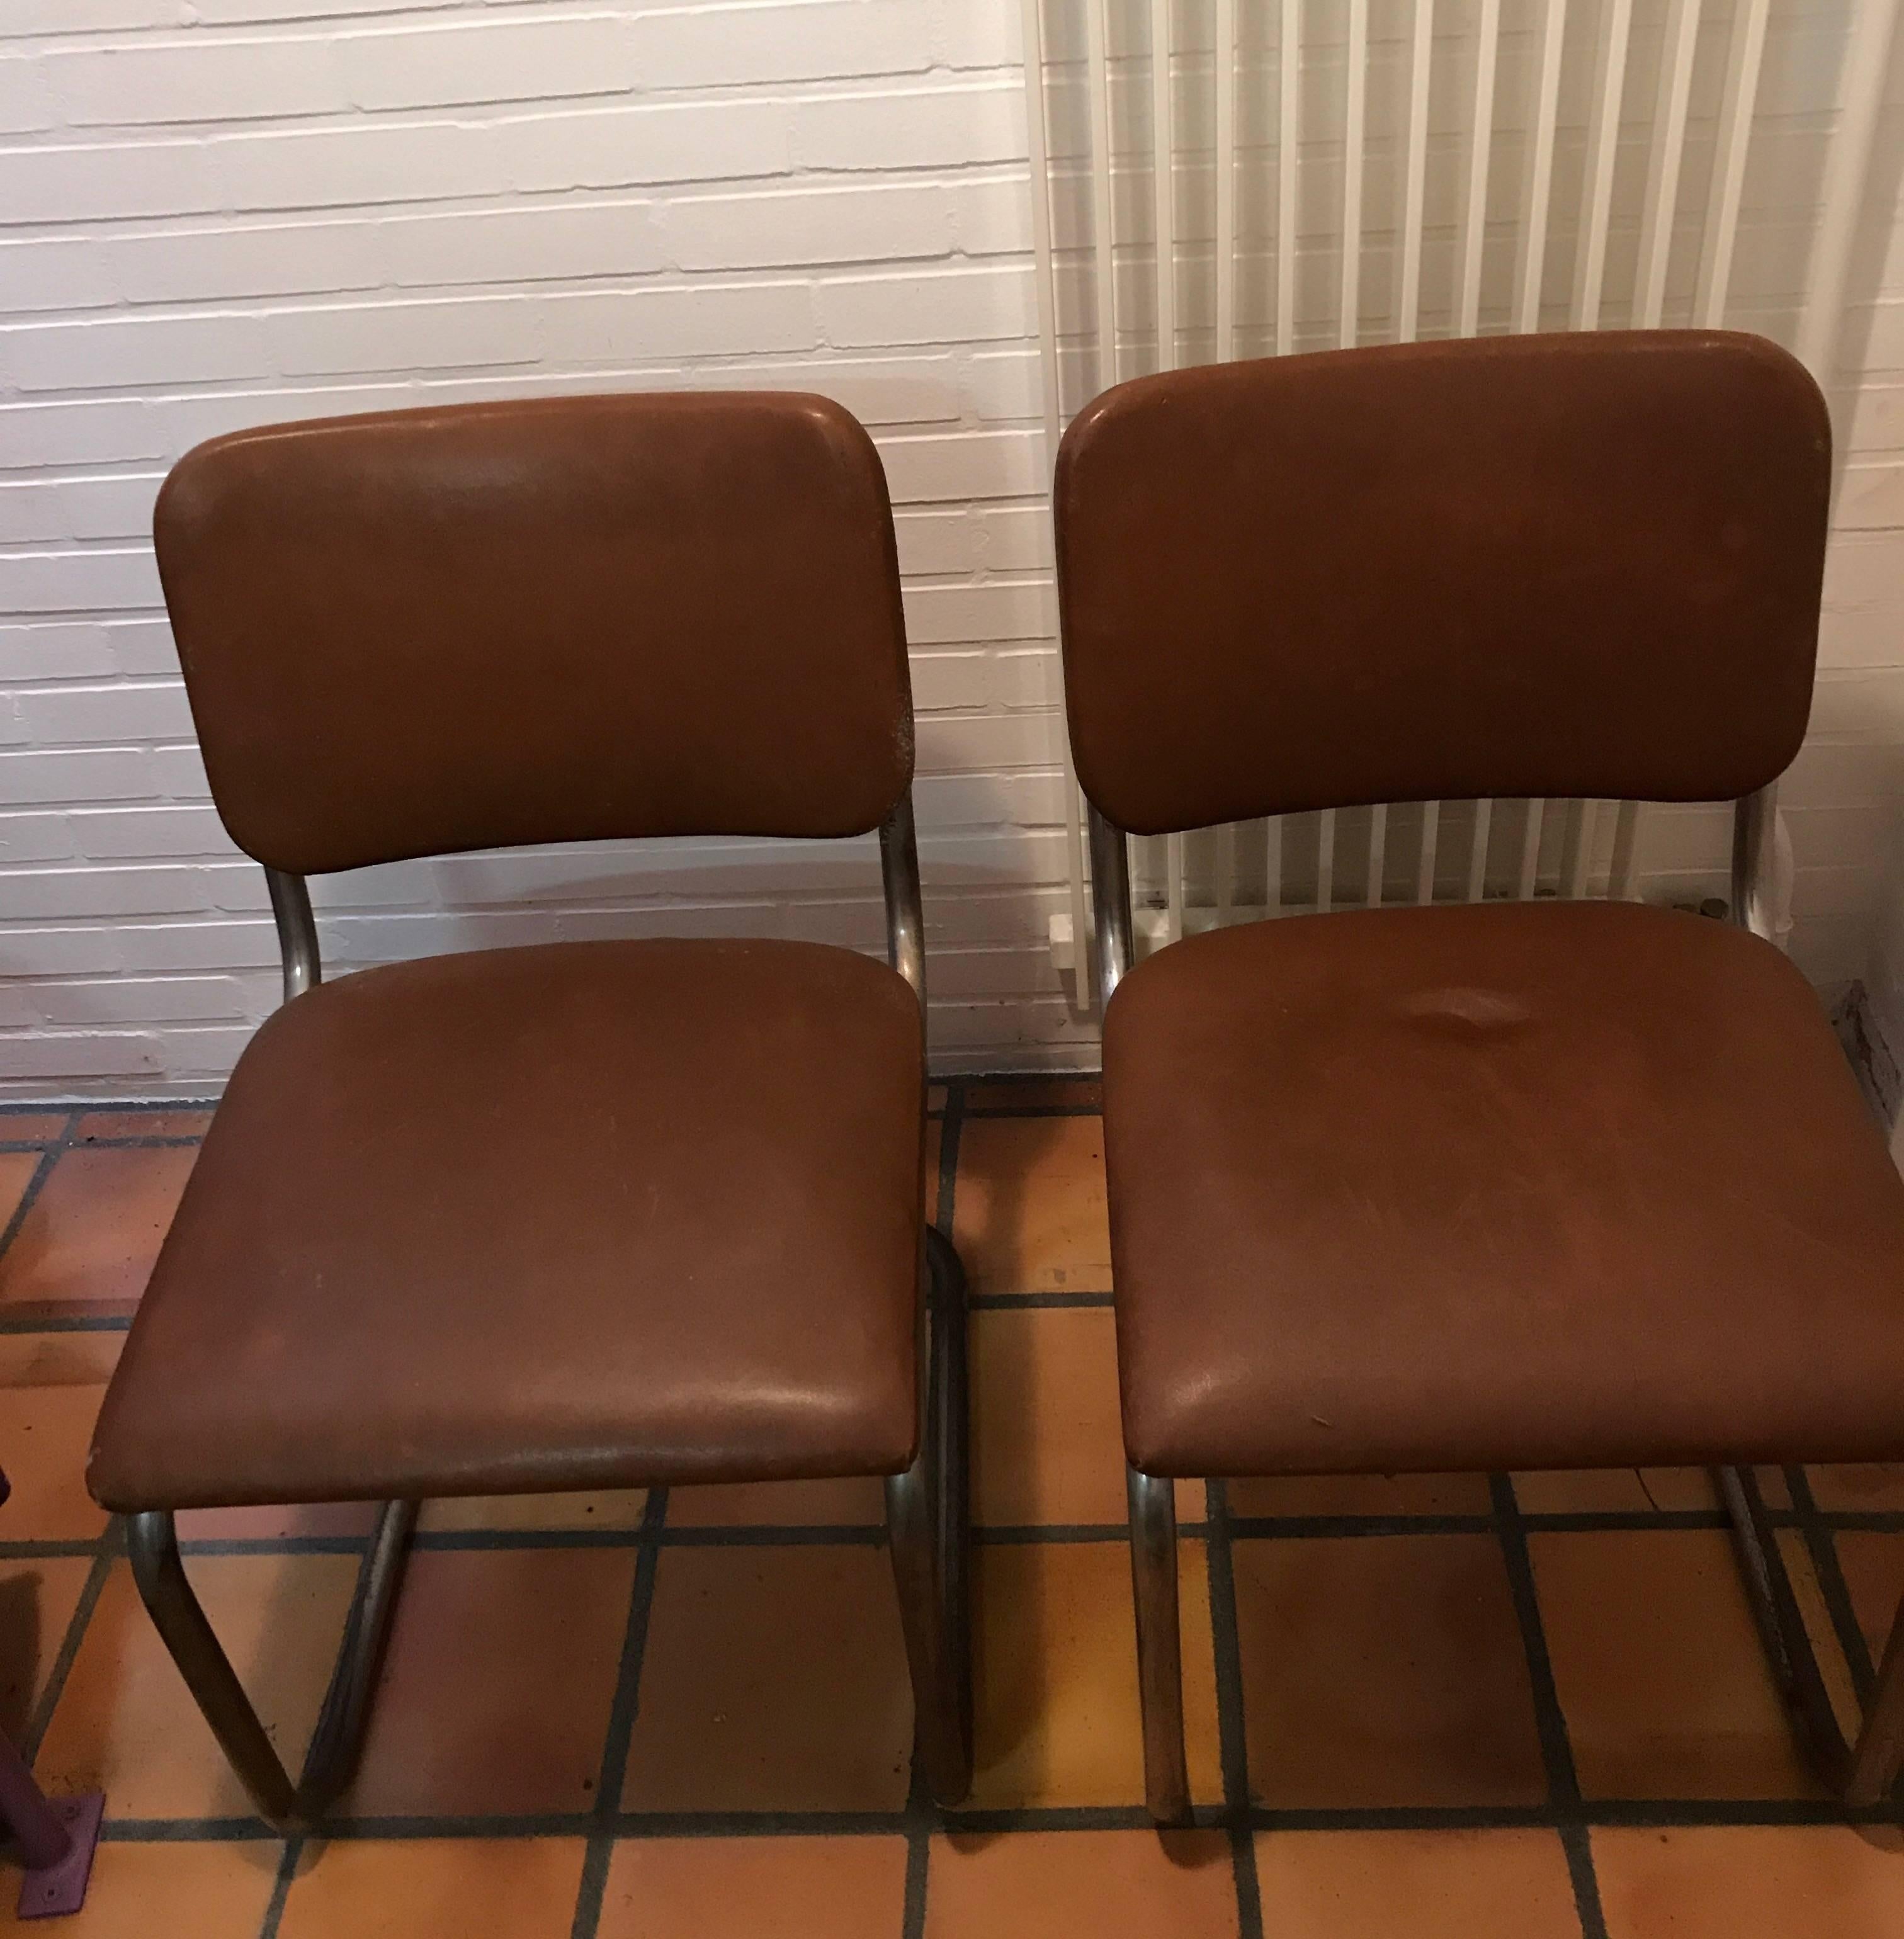 Thonet model B32 in brown simili
Early chroom with traces and patina off time
Produced from 1935 till 1950
Signed or larked on the back seat 
Early production and very collectable chairs 
Nice pair.
 